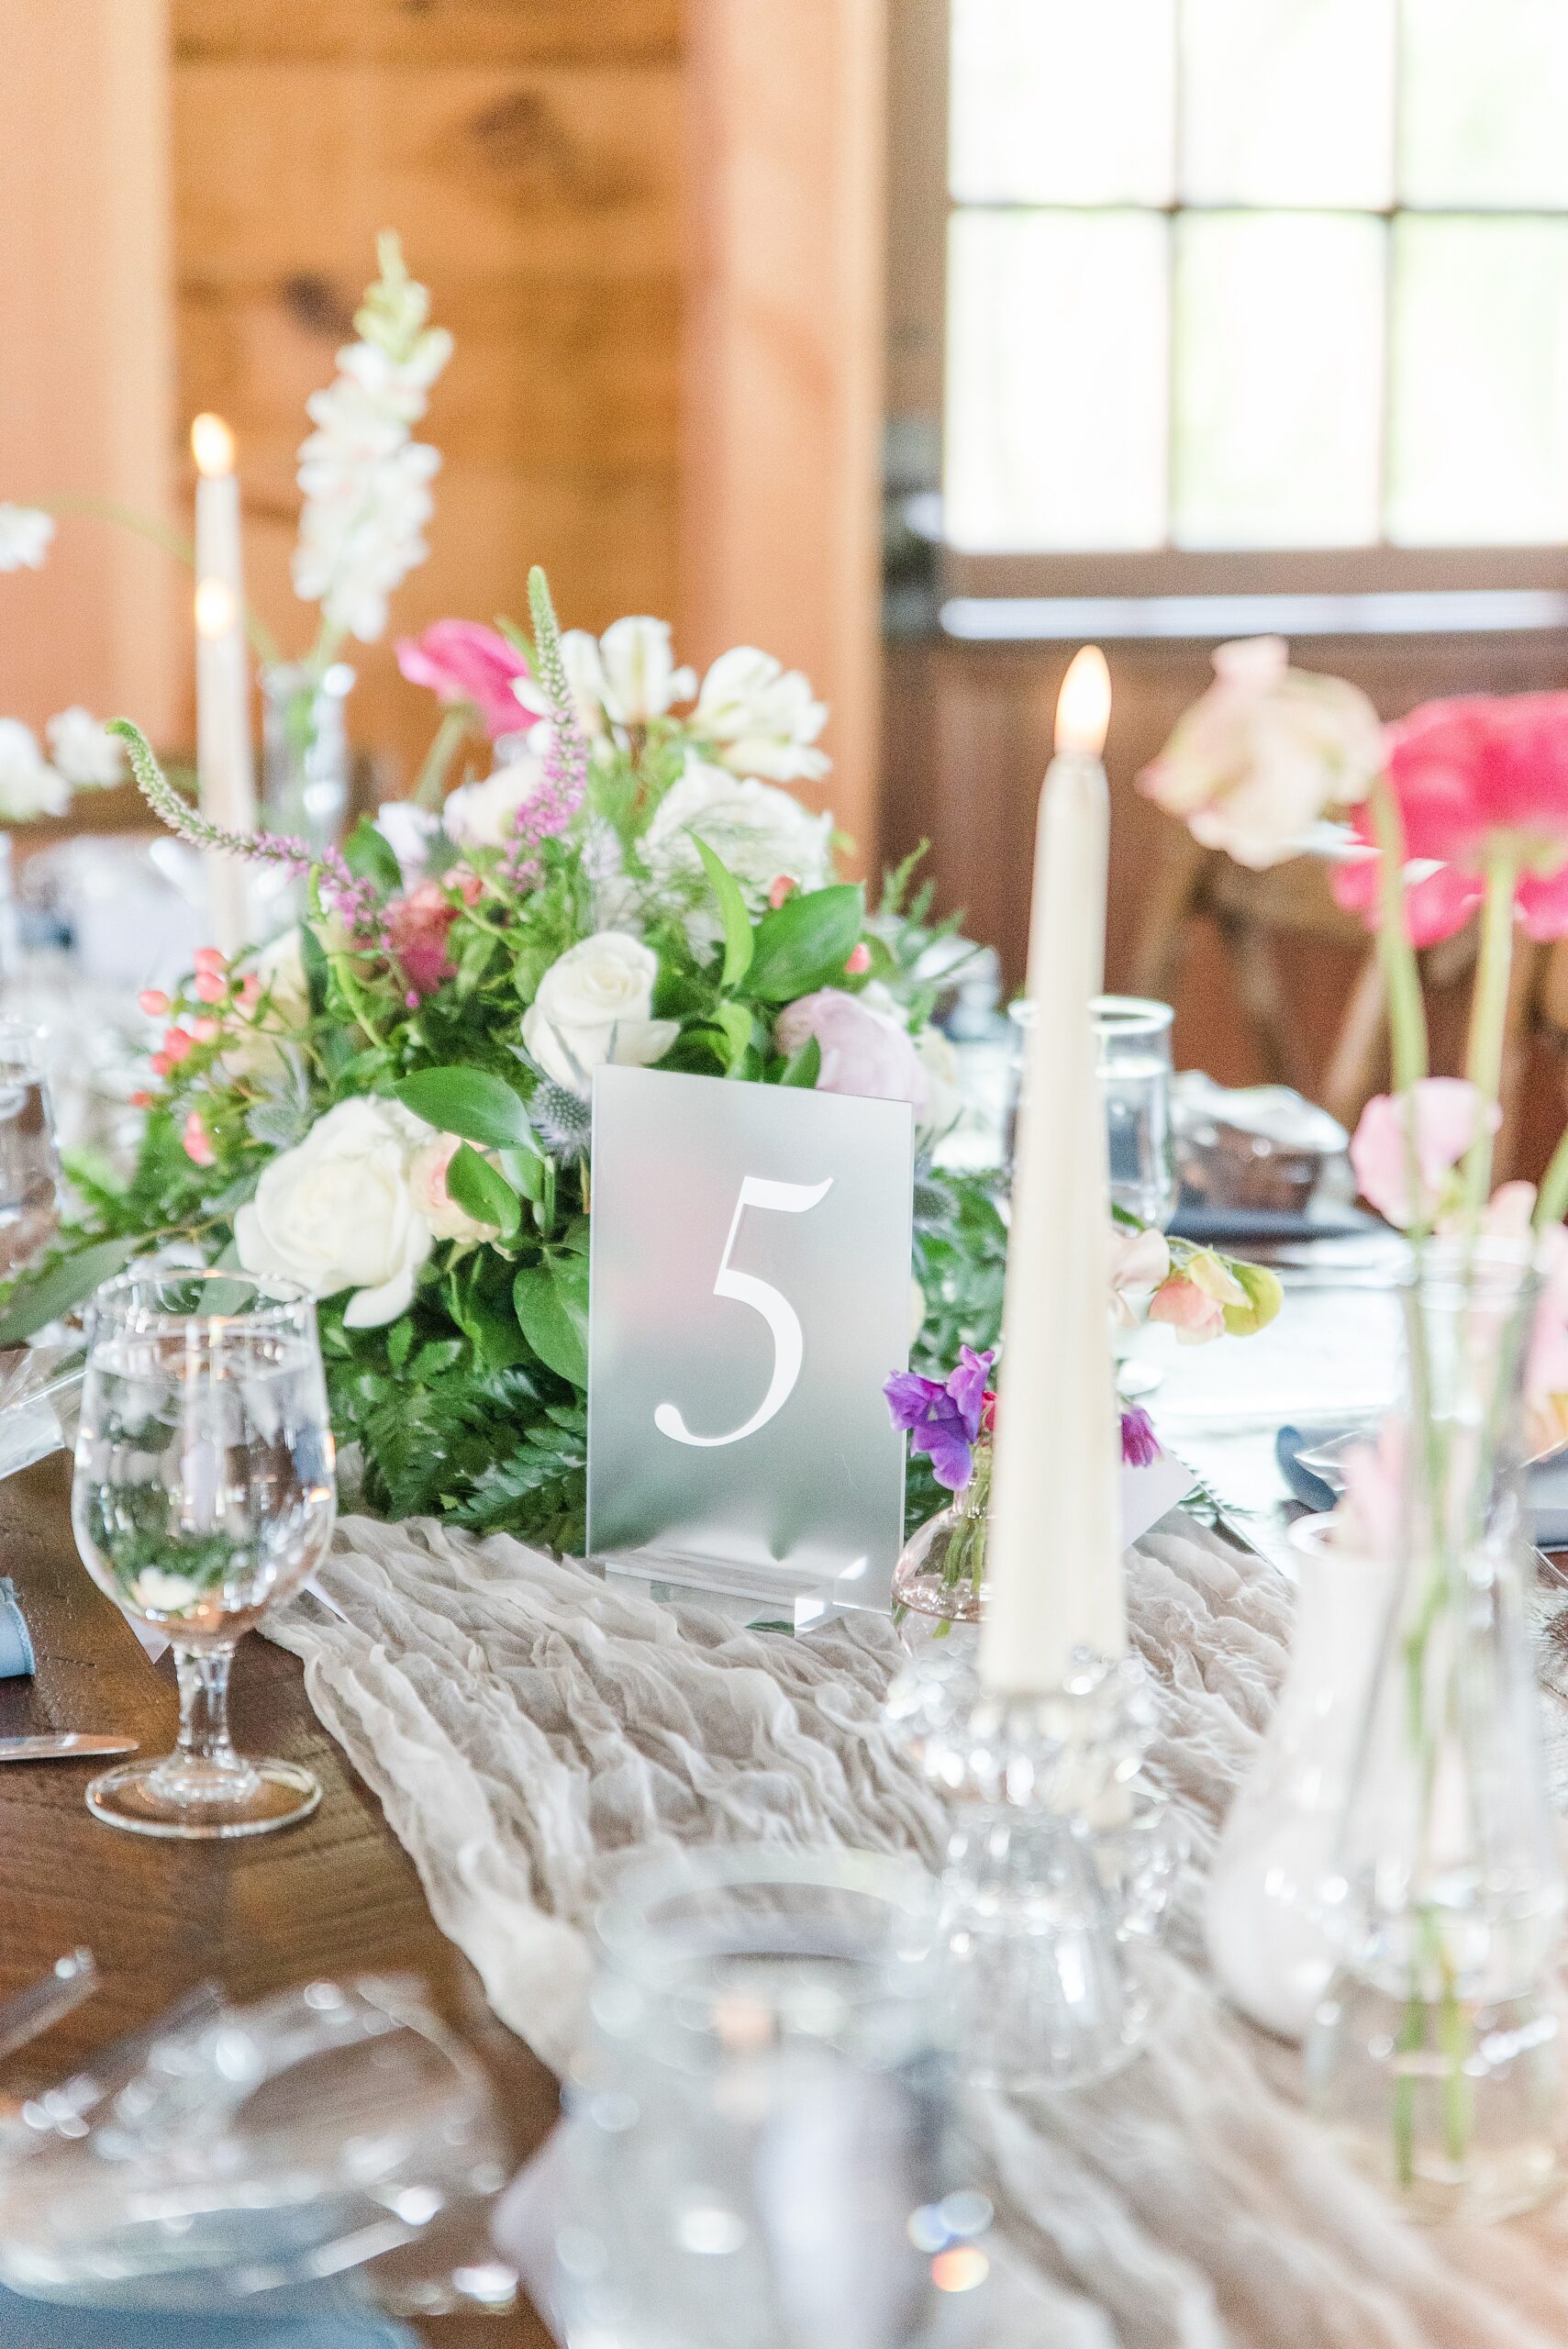 Details of a Bluebird Manor wedding reception table with florals on a wood table